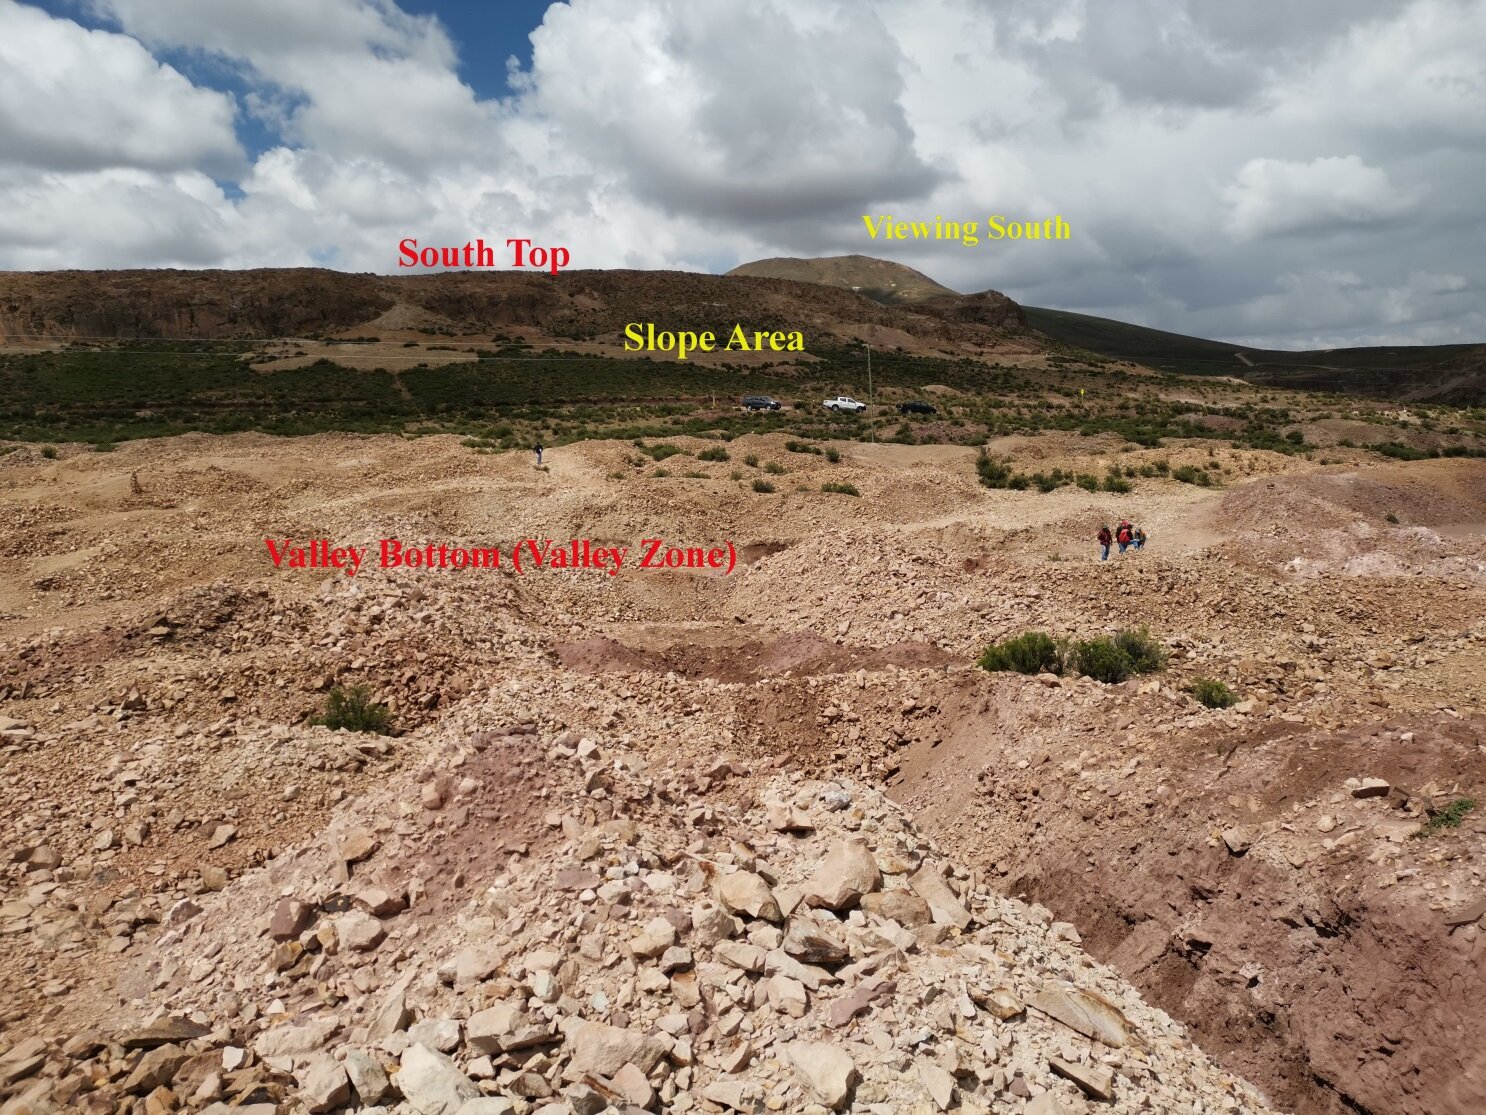 Photo 1: Extensive Mining Diggings and Dumps at the Valley Zone and the South Top